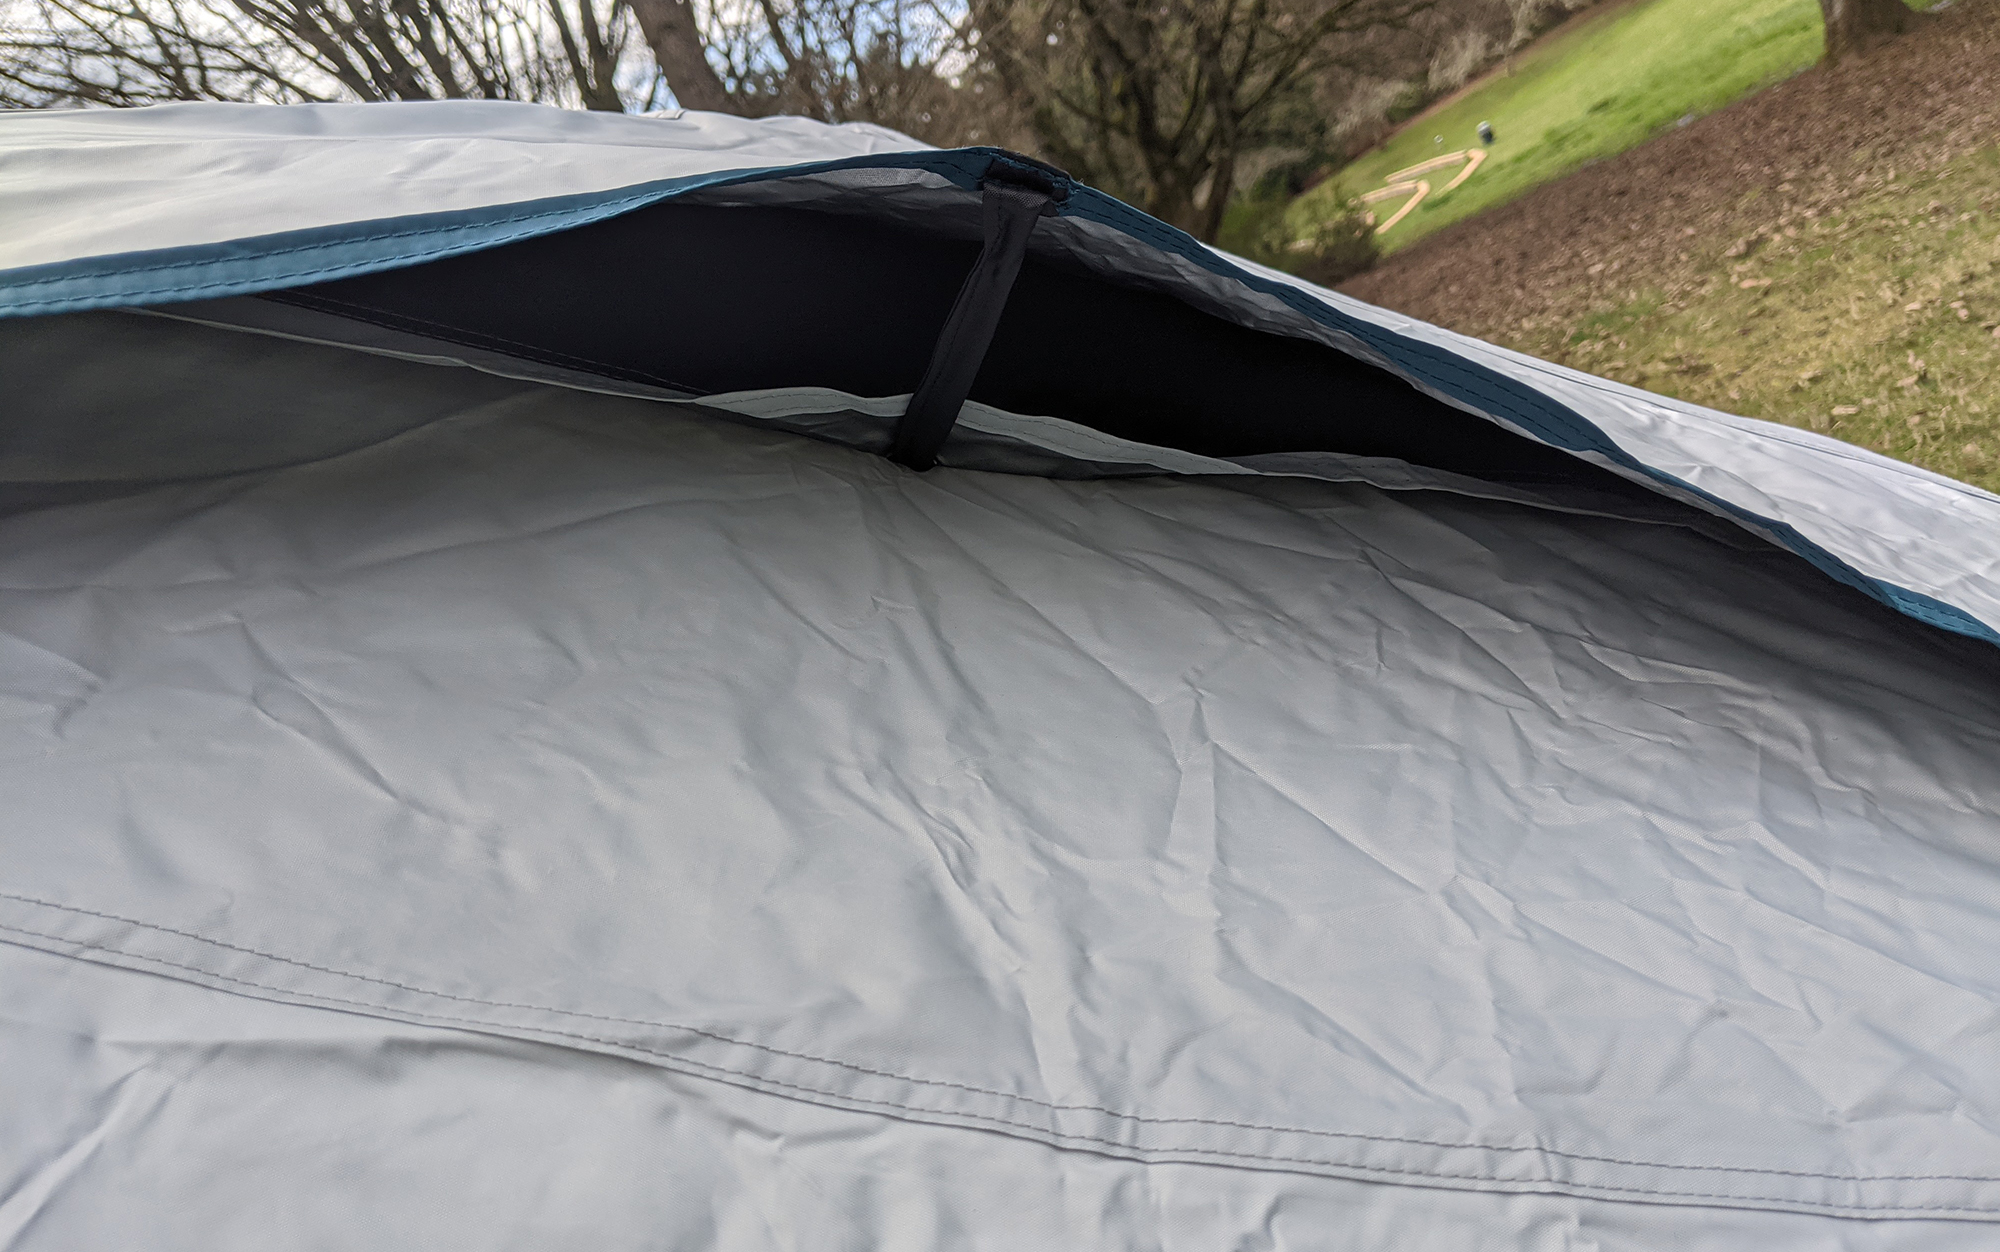 Very small vents provide the only possible inlet for this extremely dark tent.